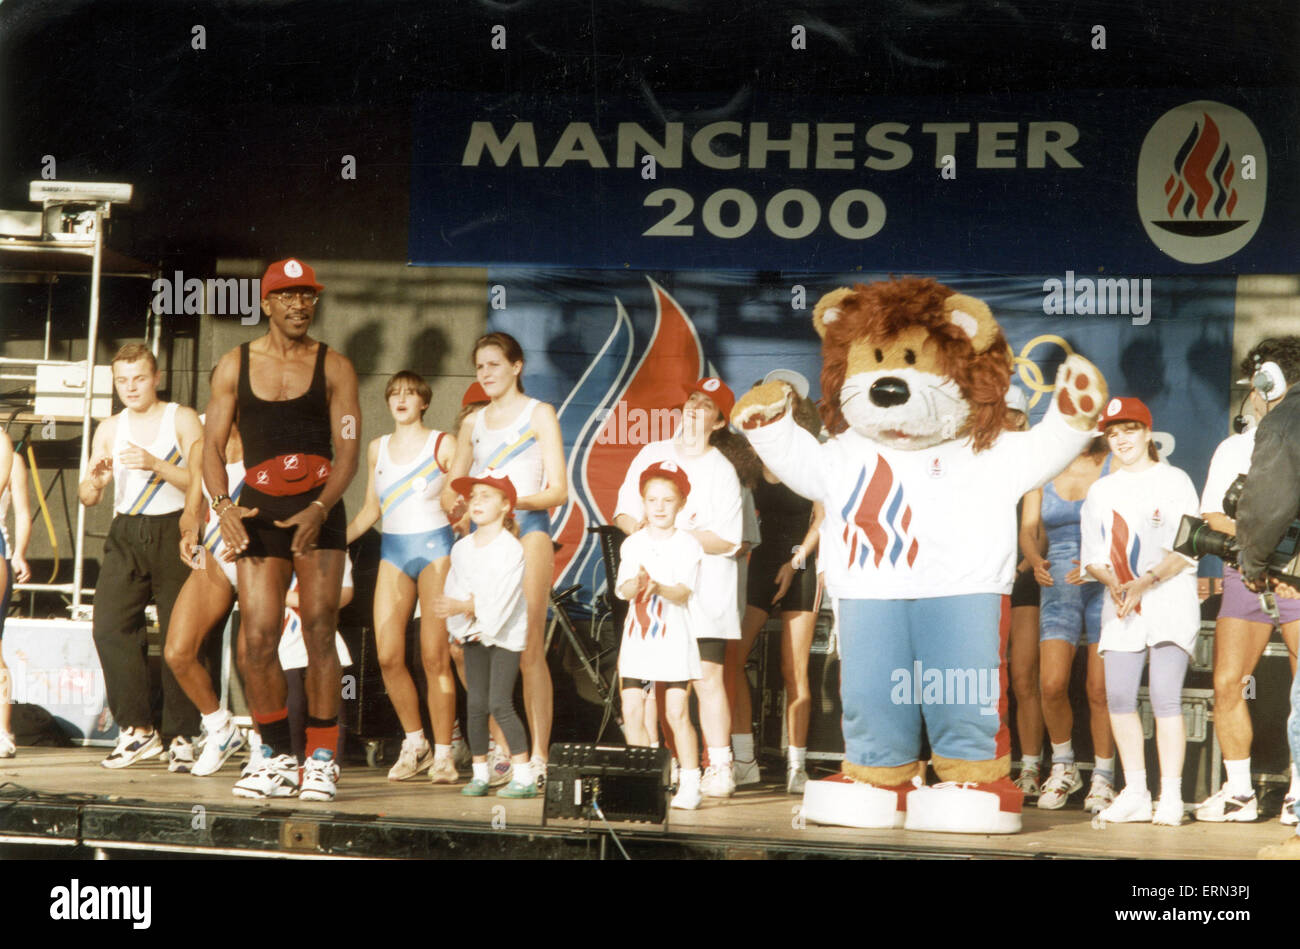 Manchester 2000 Olympic Bid, Crowds await official announcement on who will be hosting the 2000 Olympic Games, Decision Day, 23rd September 1993. Pictured. Mr Motivator, Derrick Evans and Mascot on stage. Stock Photo